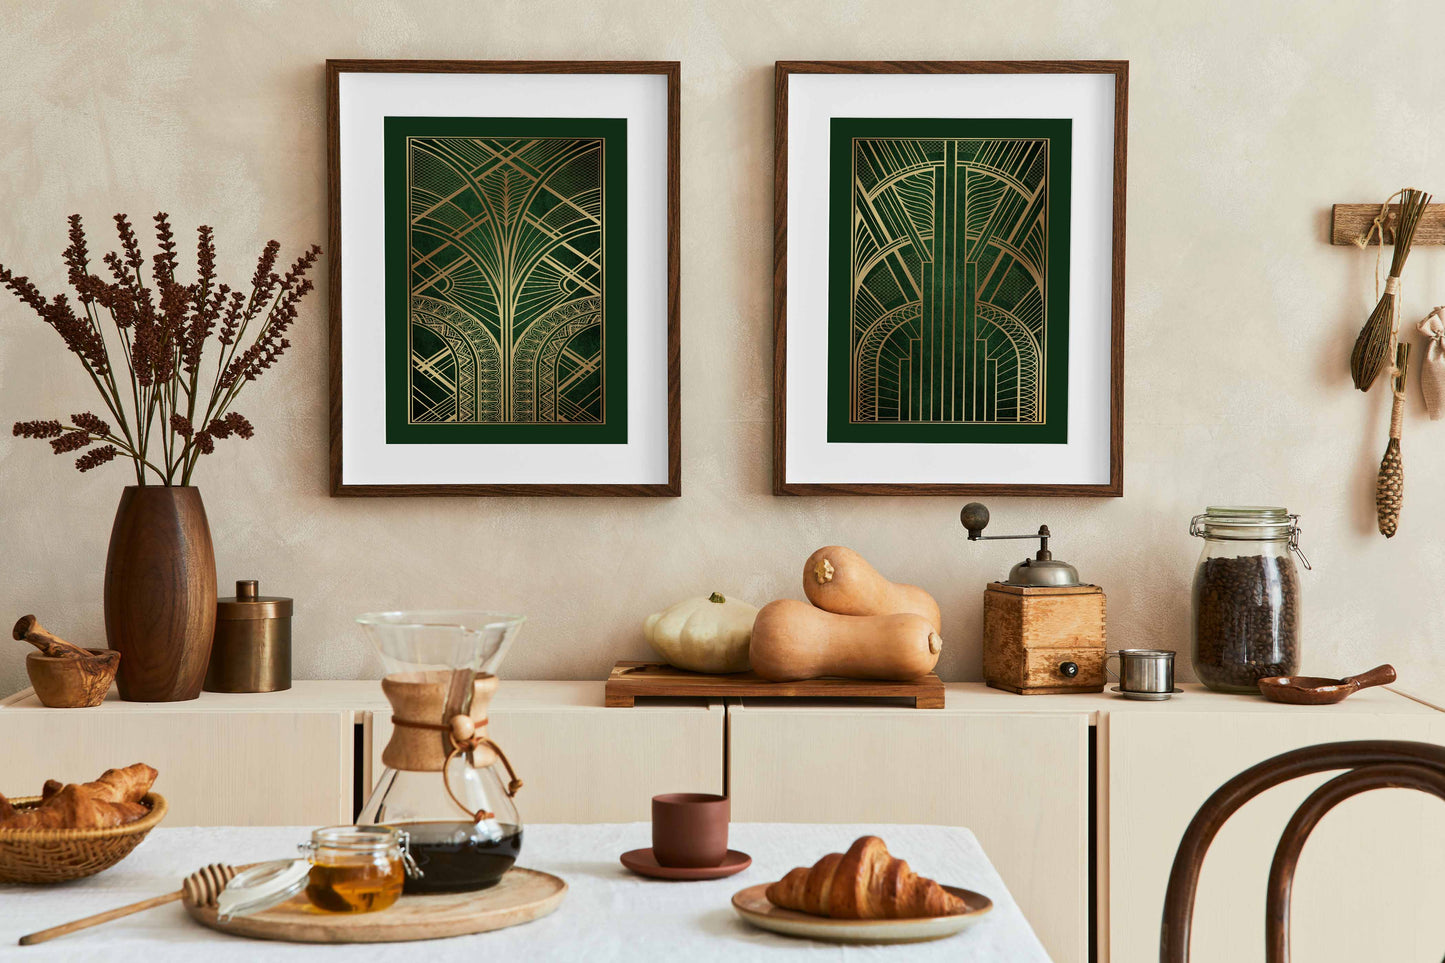 Set of green and gold art deco pattern prints